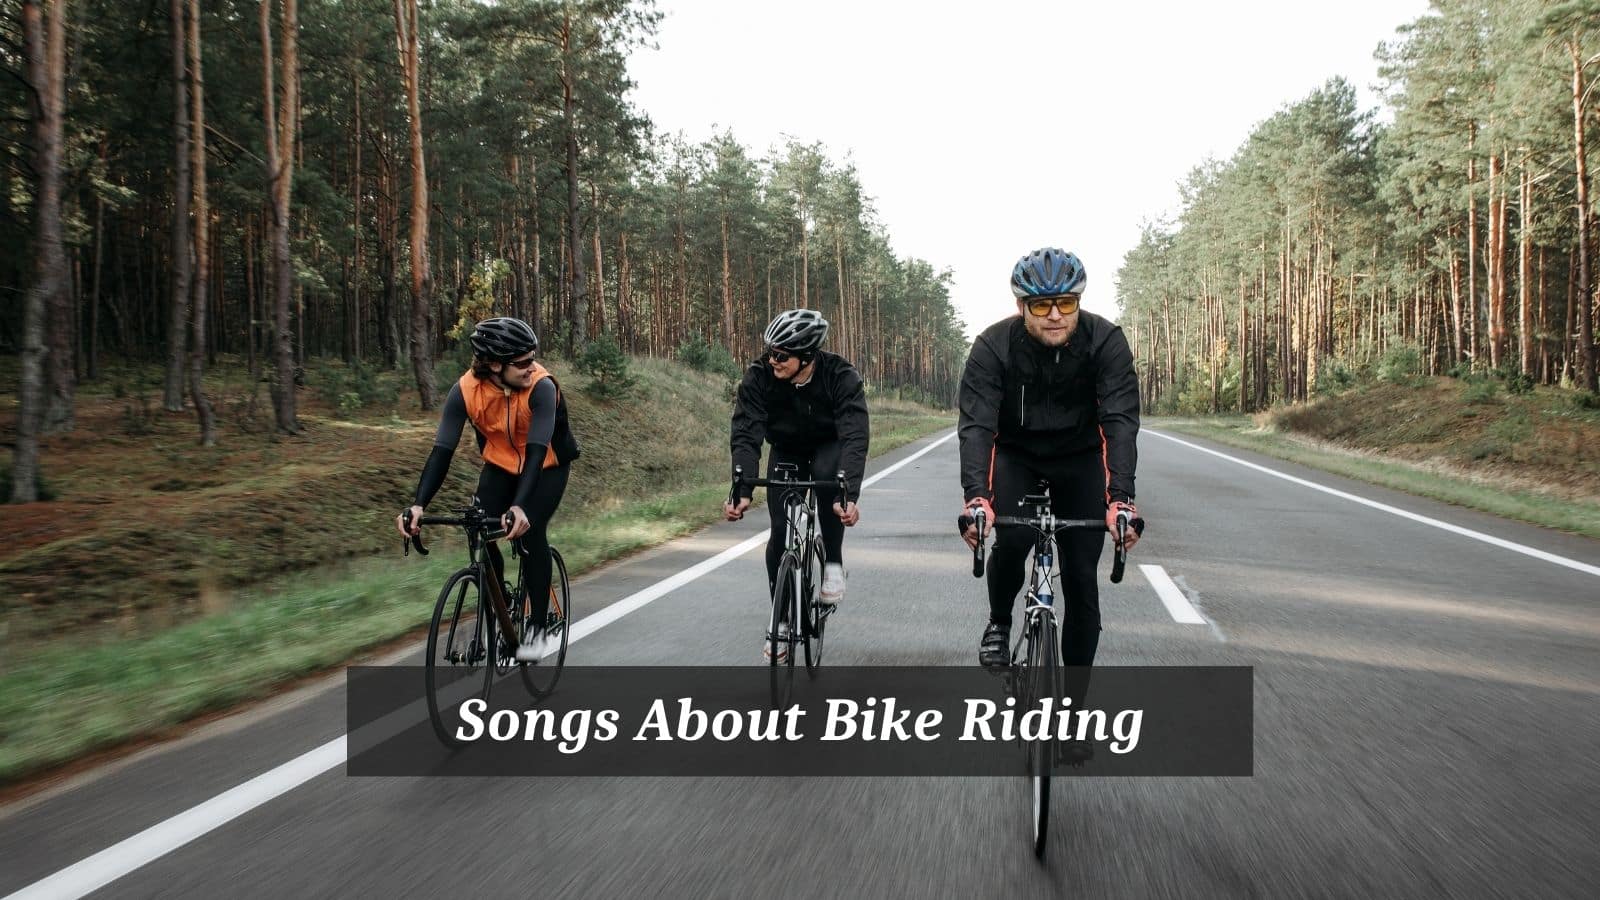 Songs About Bike Riding